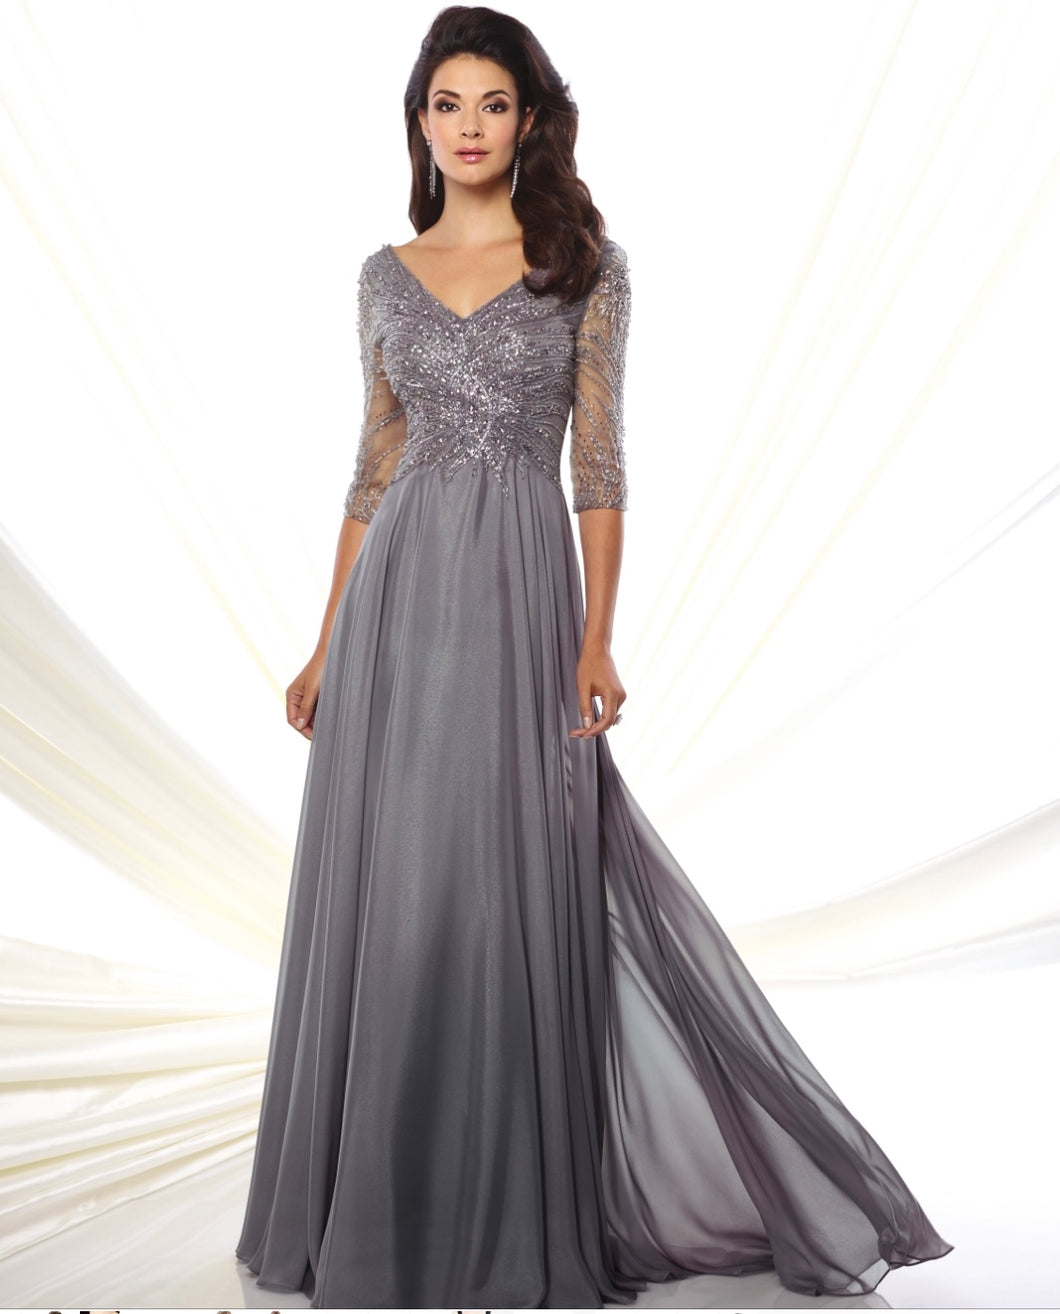 Montage 116950 Long Sleeved Chiffon Gown